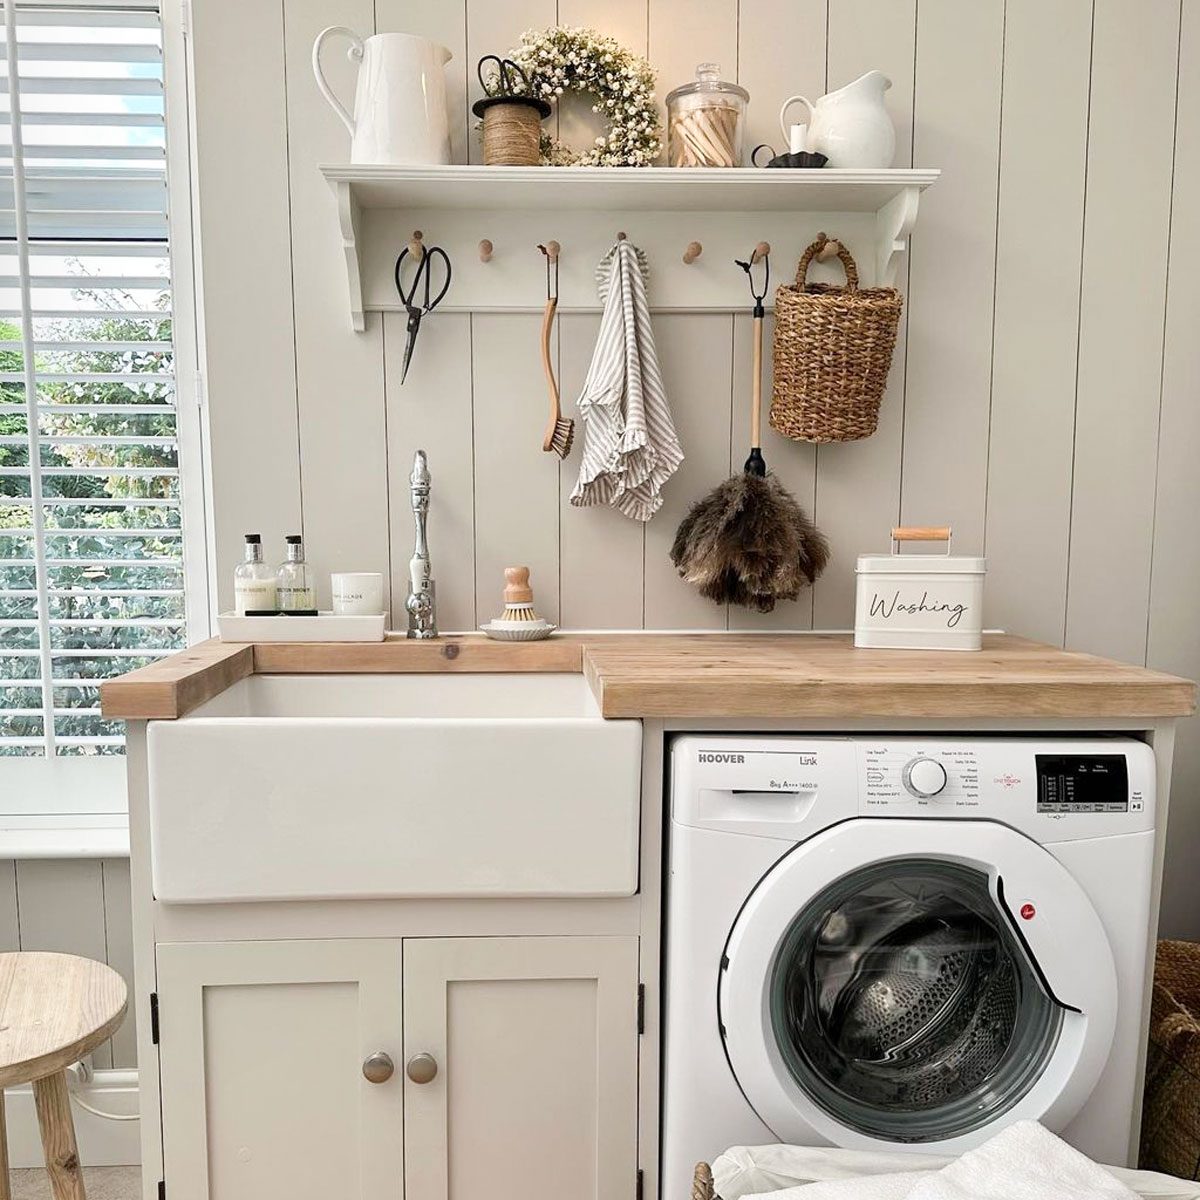 How to design a timeless, functional farmhouse laundry